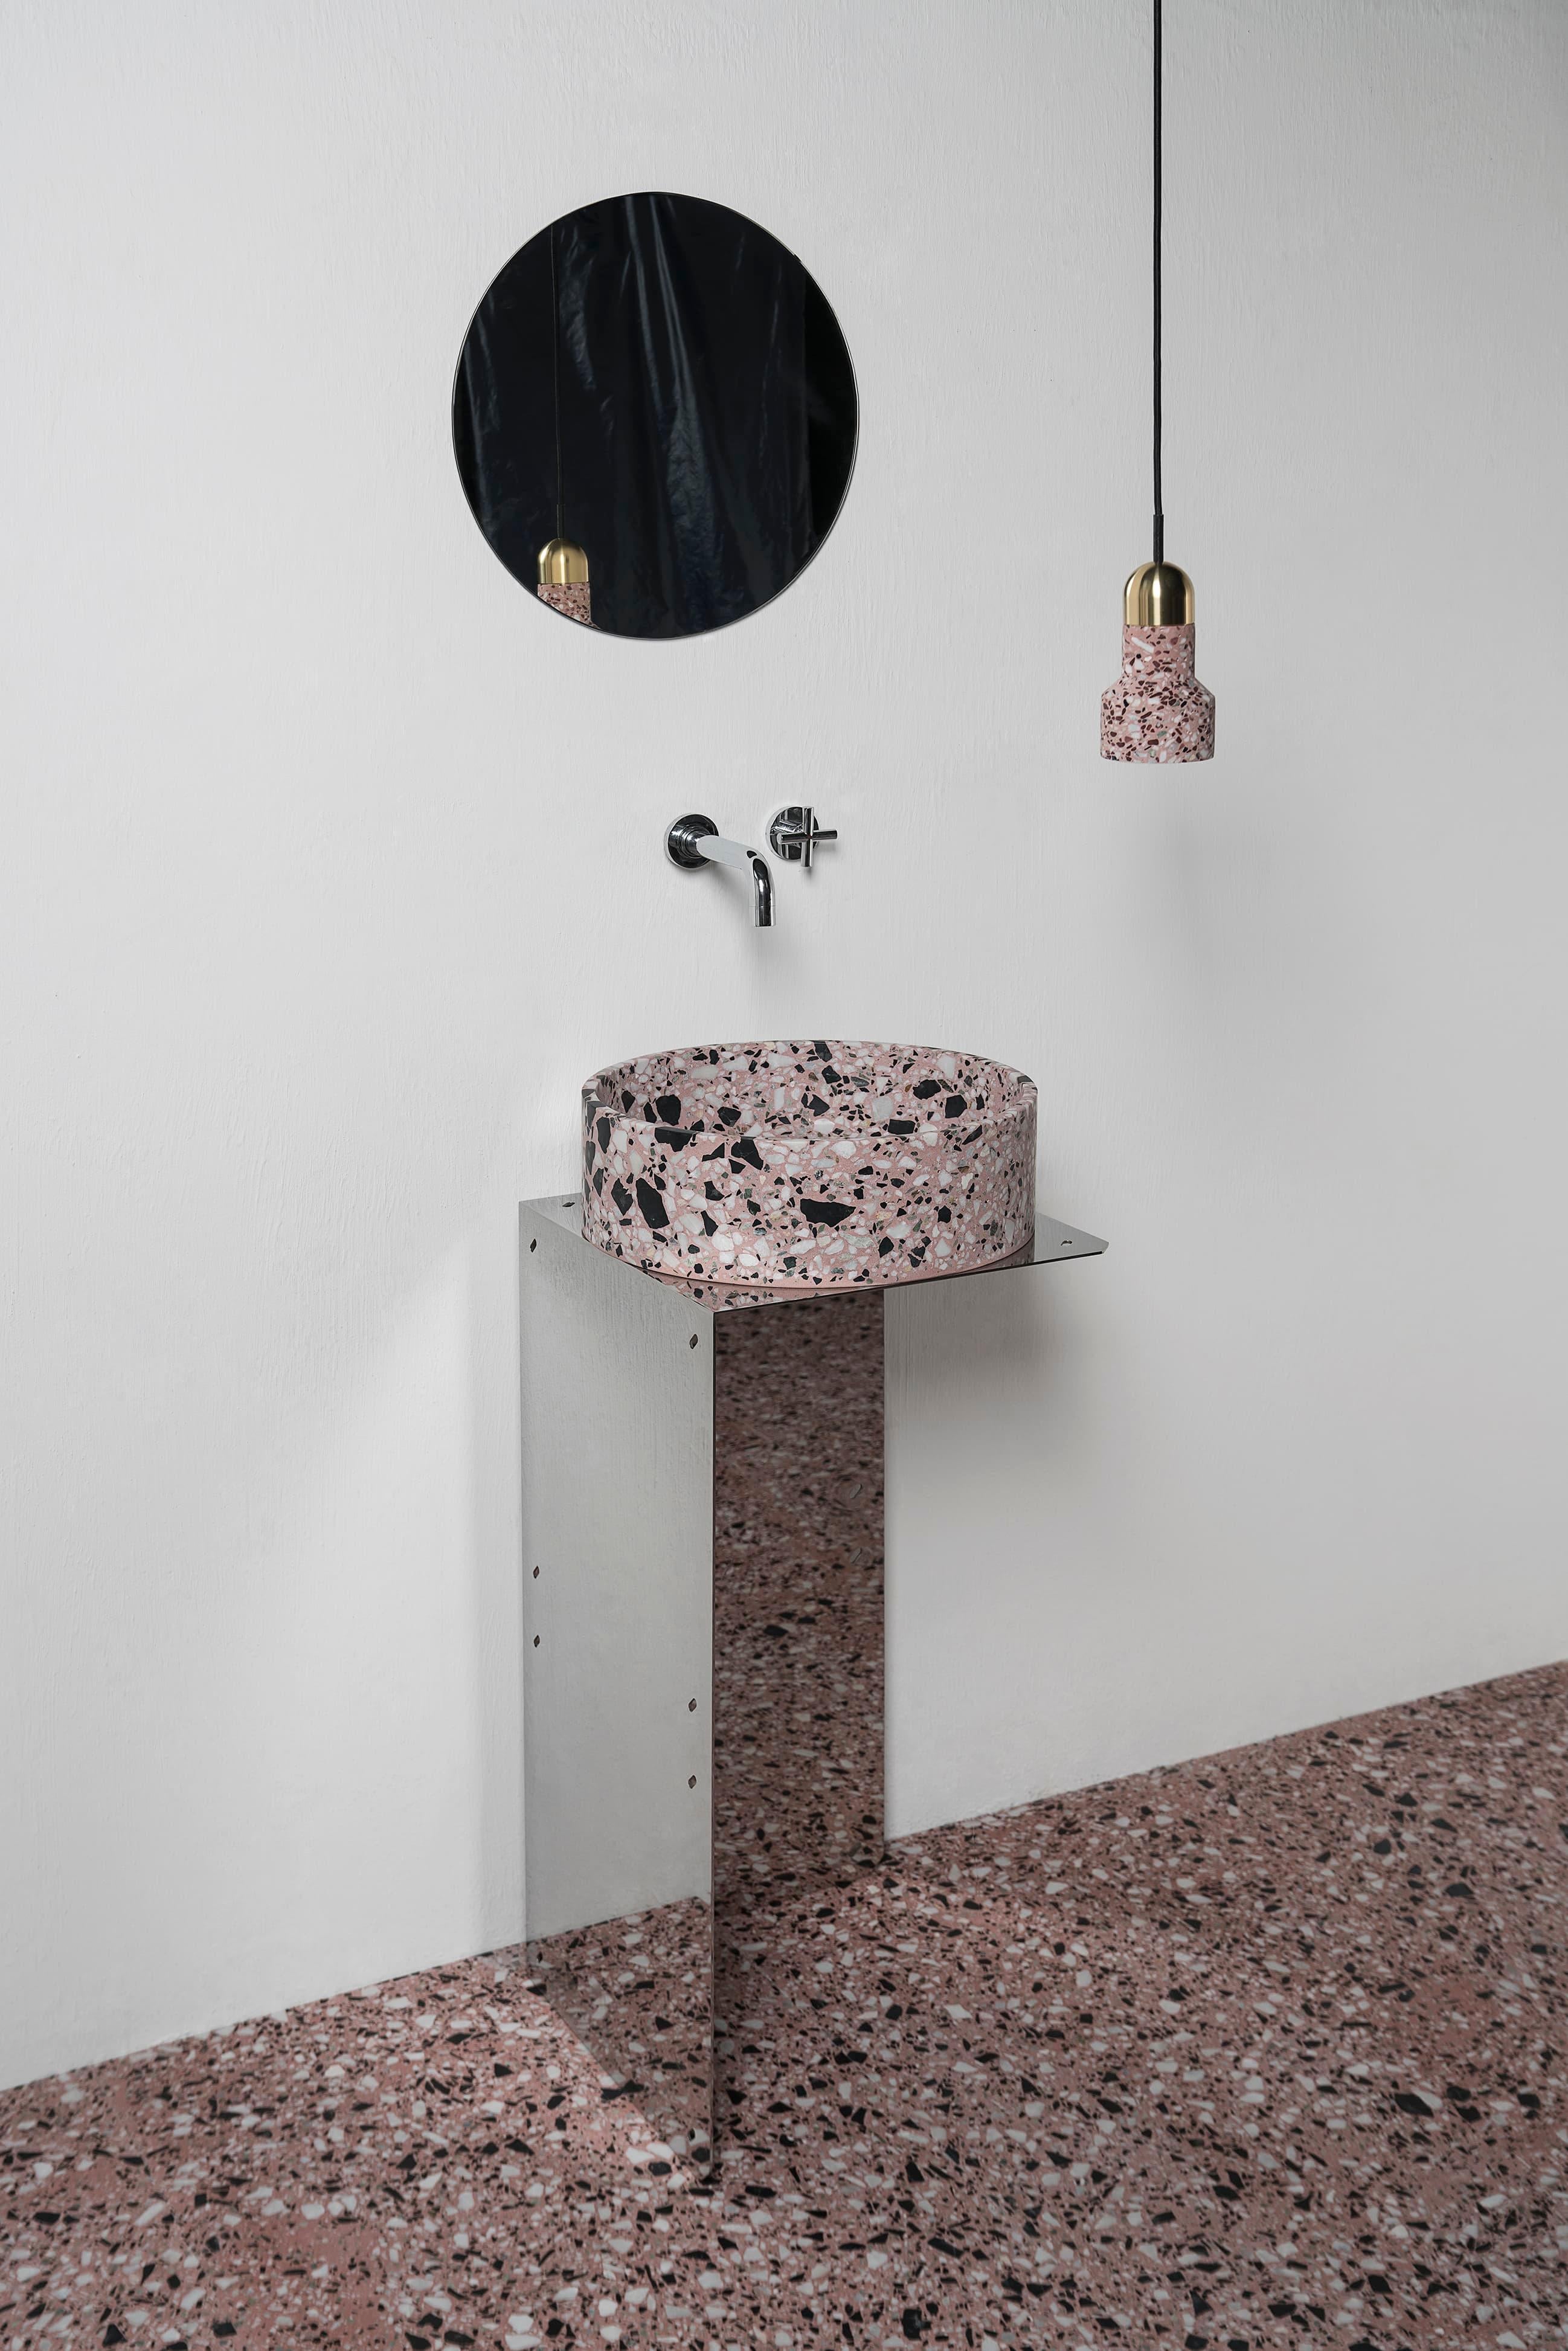 'HUI' is a wash basin / vessel sink made of terrazzo
by Bentu design

Terrazzo colors: white, black, red, sky blue, green mint
Dimensions: H 13cm - D 40.8cm

The basin comes with a drainer. 

Bentu Design's furniture derives its uniqueness from the